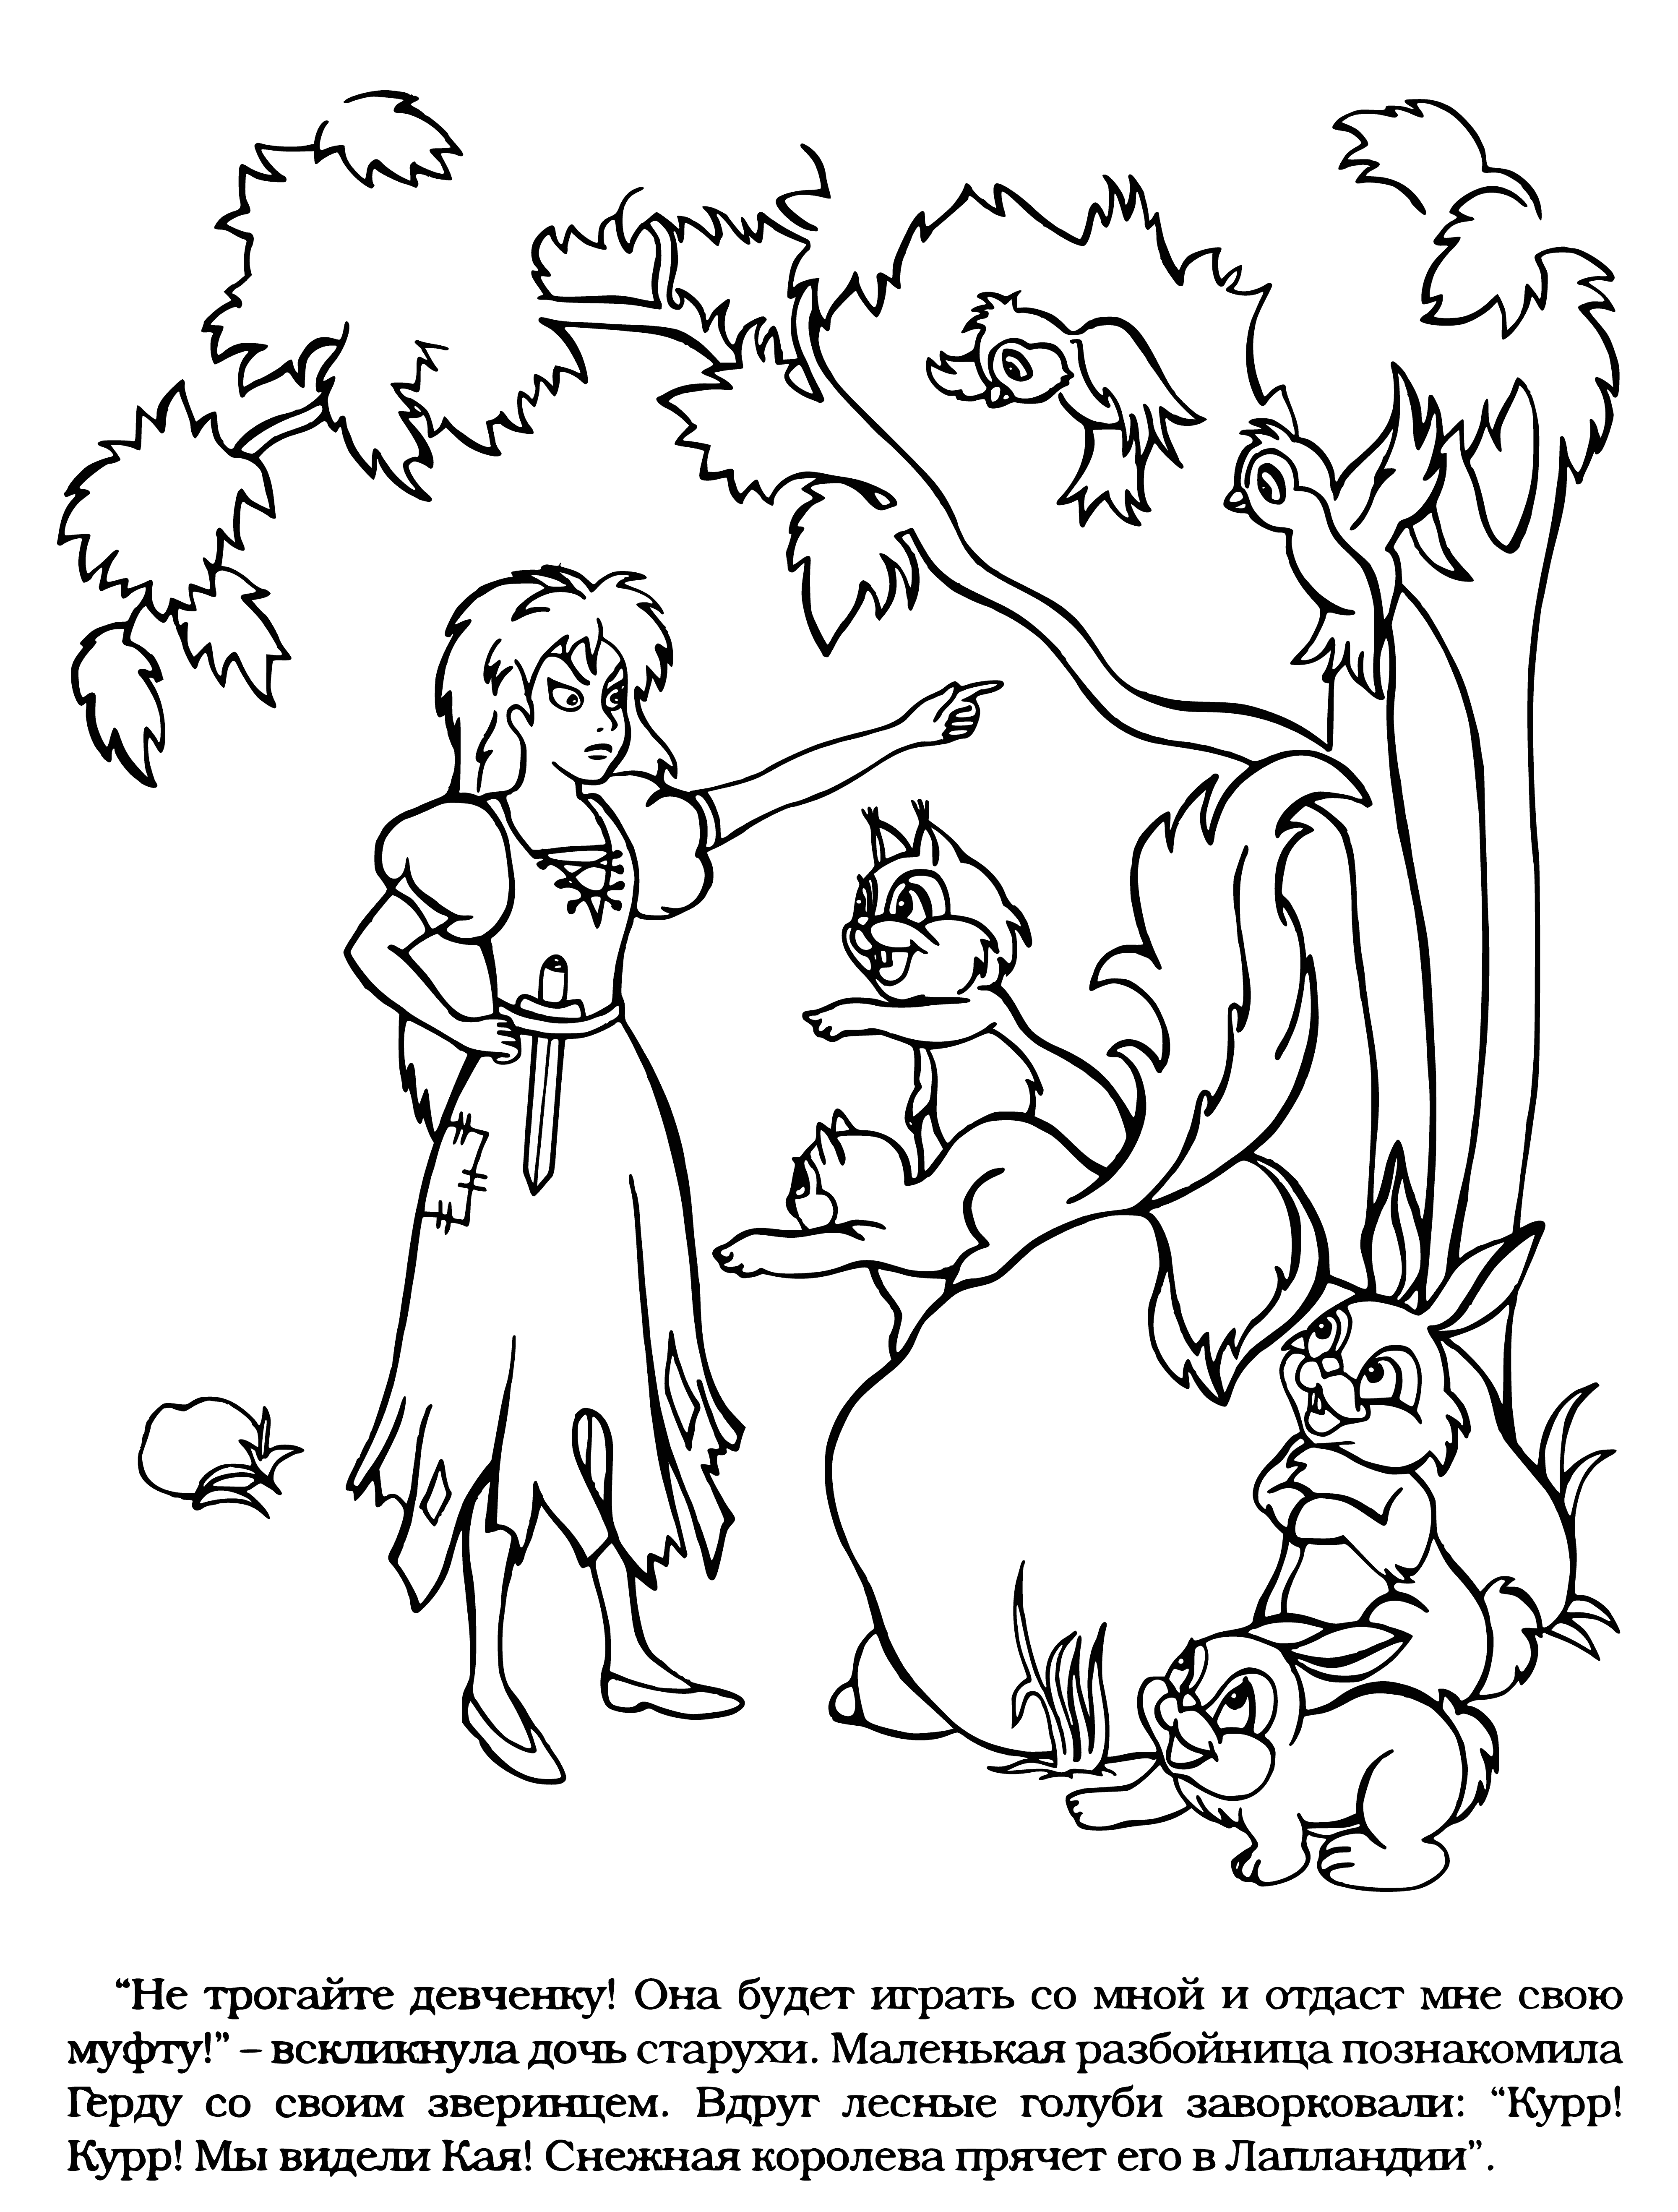 coloring page: Two children, a girl in red and a boy in blue, look off to the side w/the girl's hand on the boy's shoulder. #coloringpage